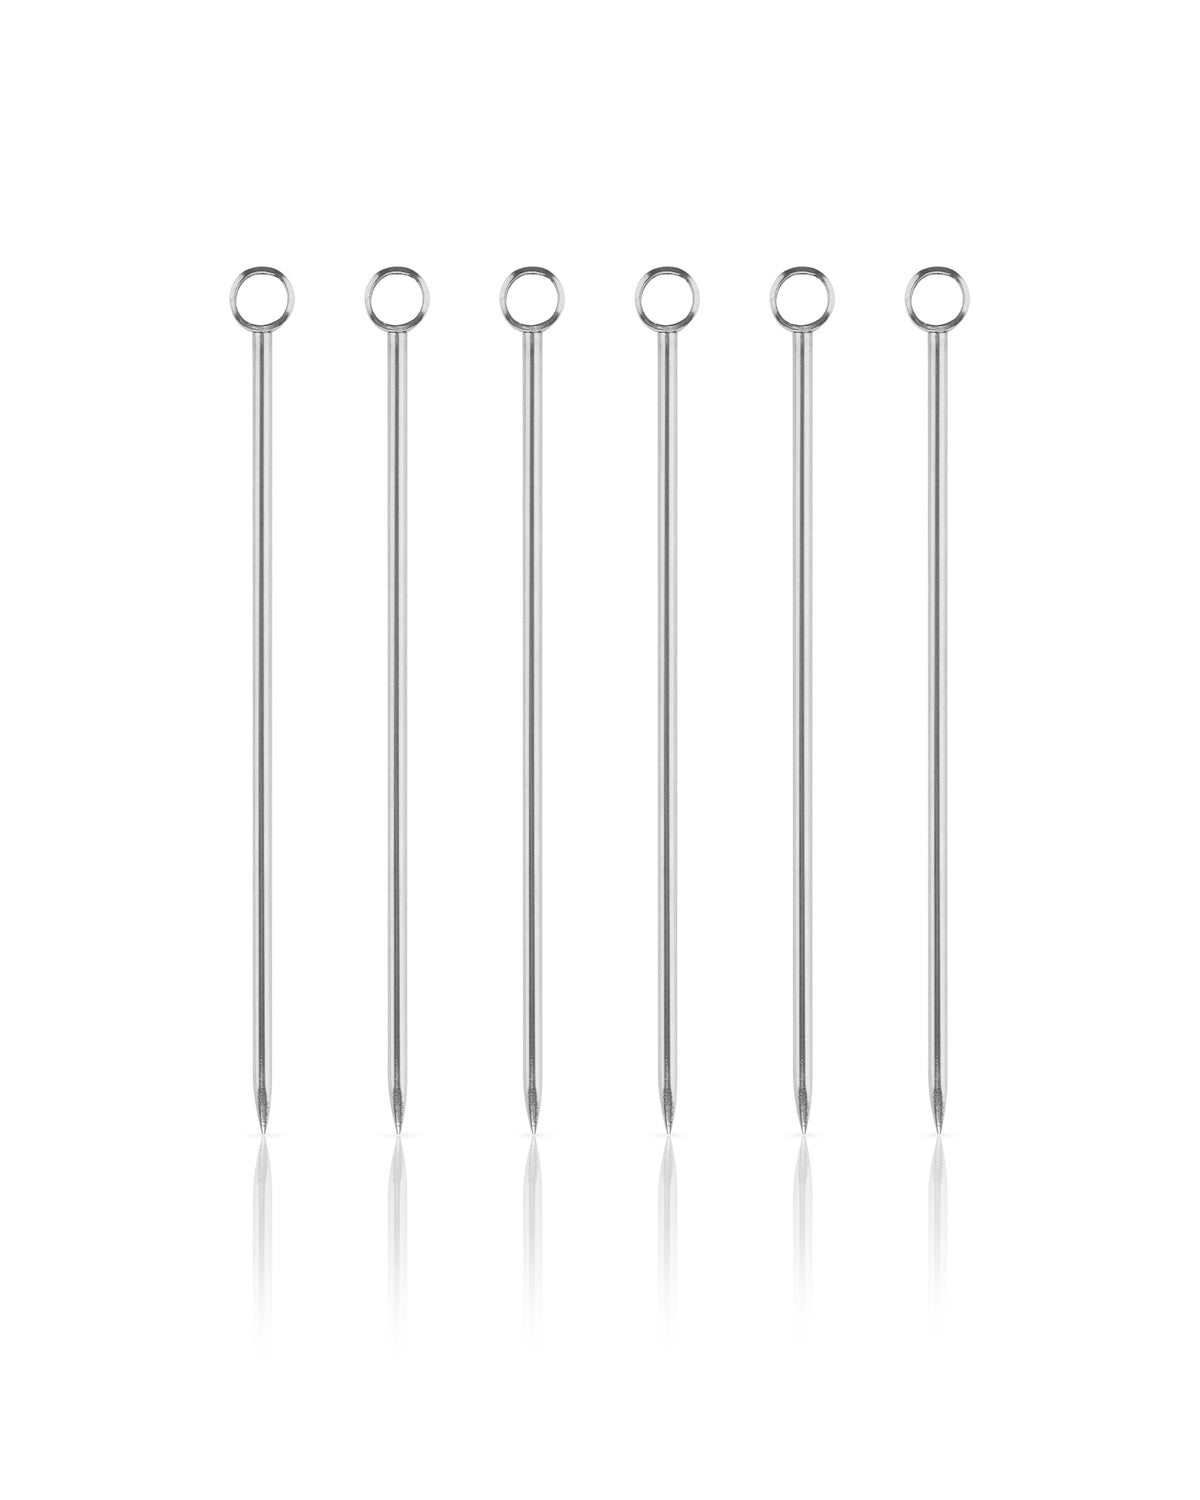 Stainless Steel Cocktail Picks